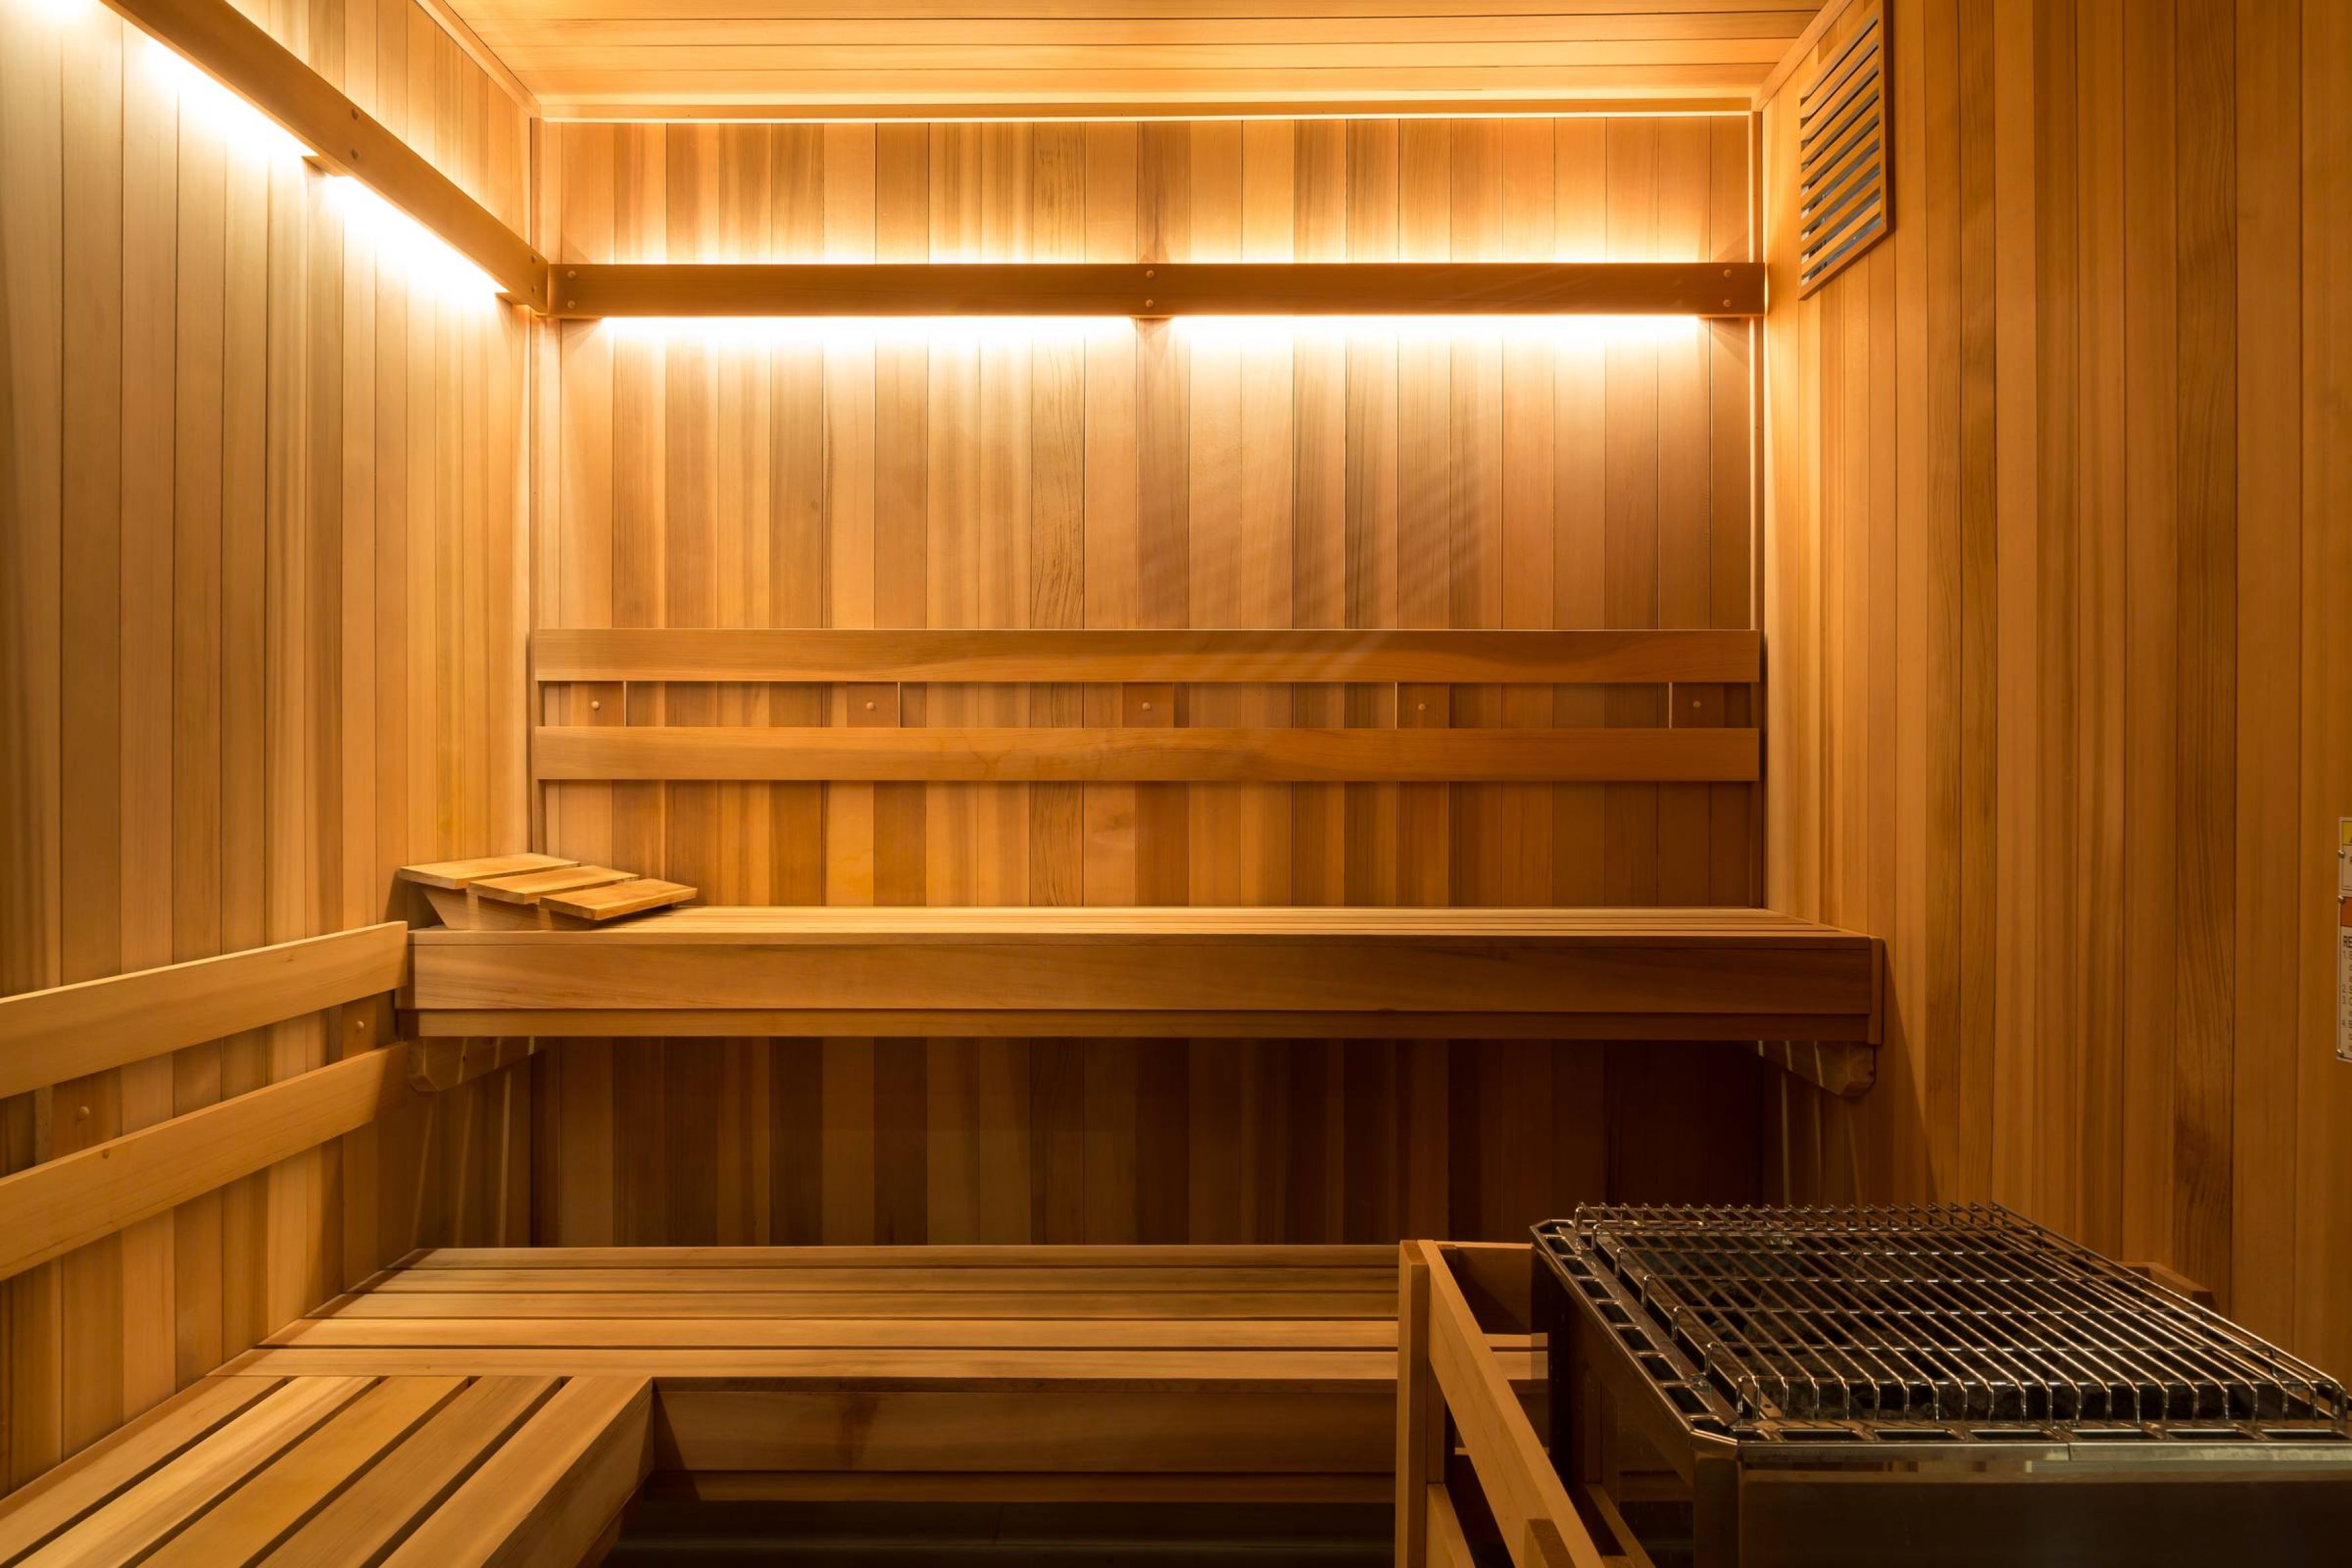 Apartments at holly crest luxury sauna amenity with wood paneling and led lighting